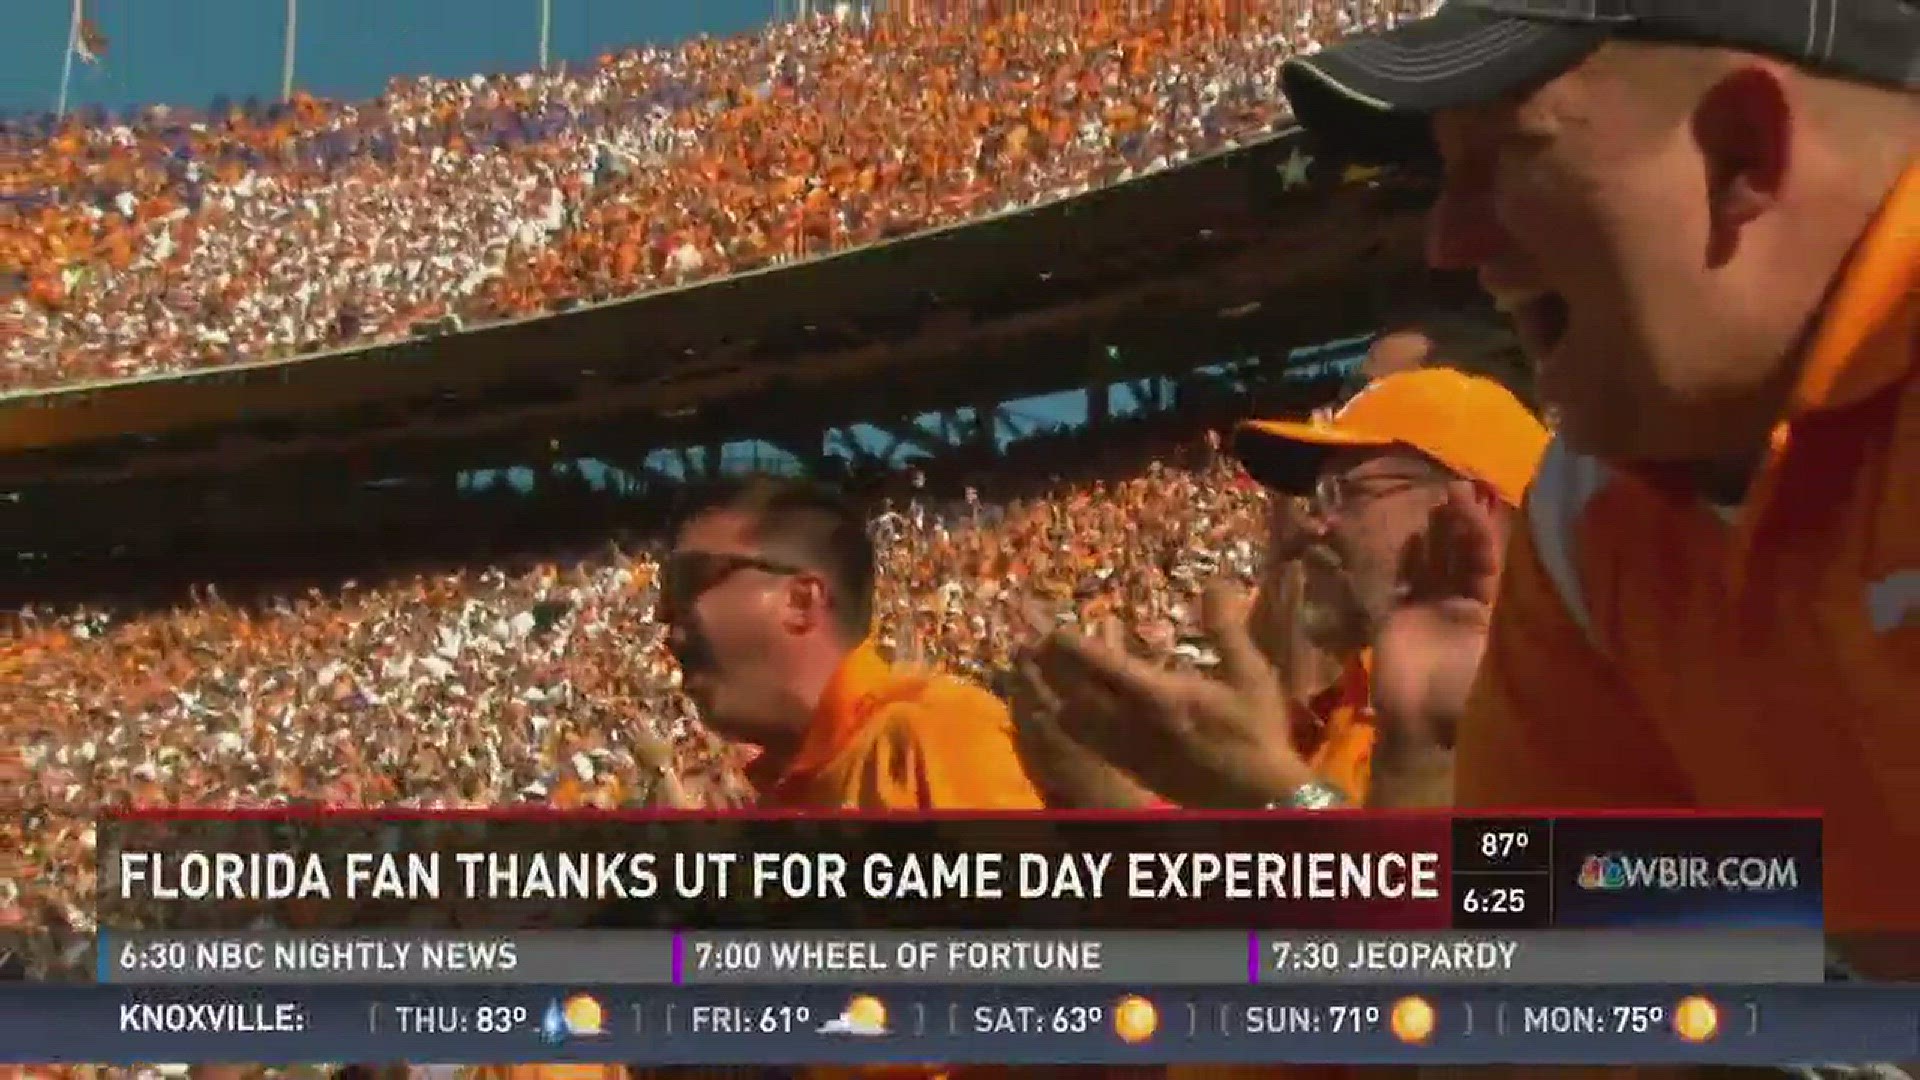 Oct. 19, 2016: One Florida fan had such a good time in Knoxville when the Gators played the Vols that he sent a letter to Mayor Rogero about his game day experience.